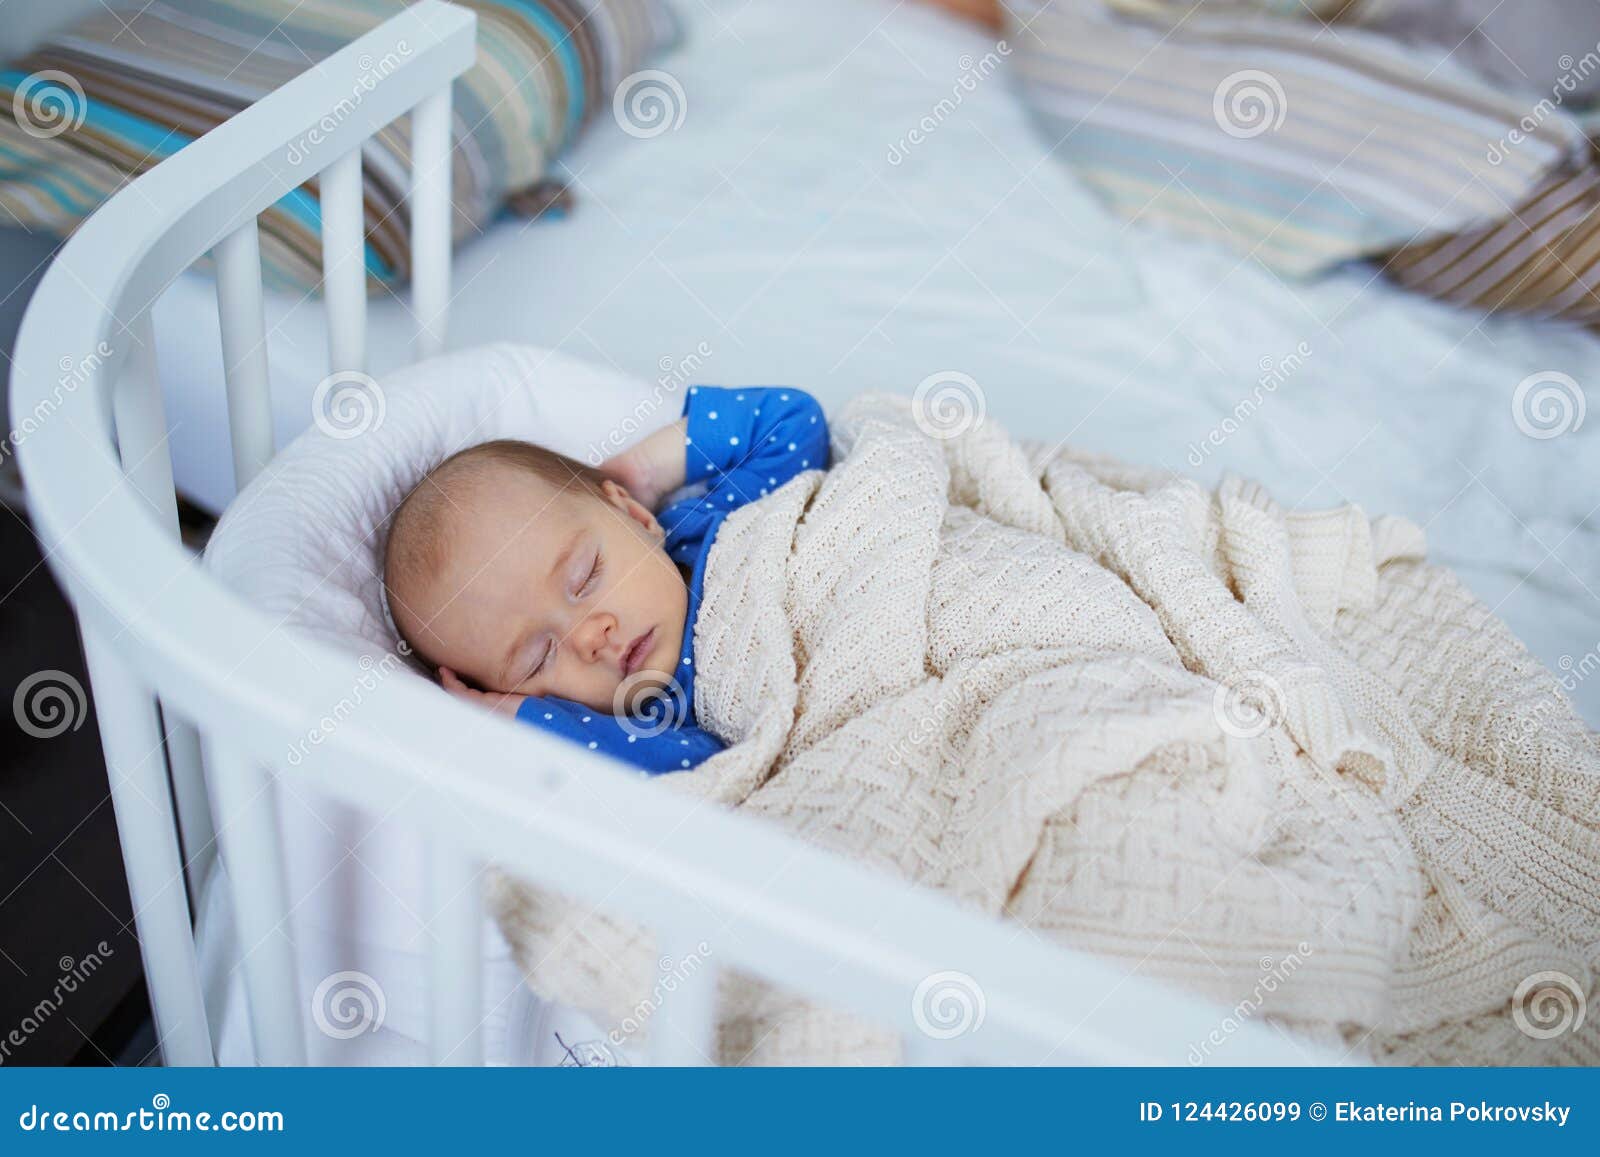 Adorable Baby Girl Sleeping In The Crib Stock Image Image Of Bedrail